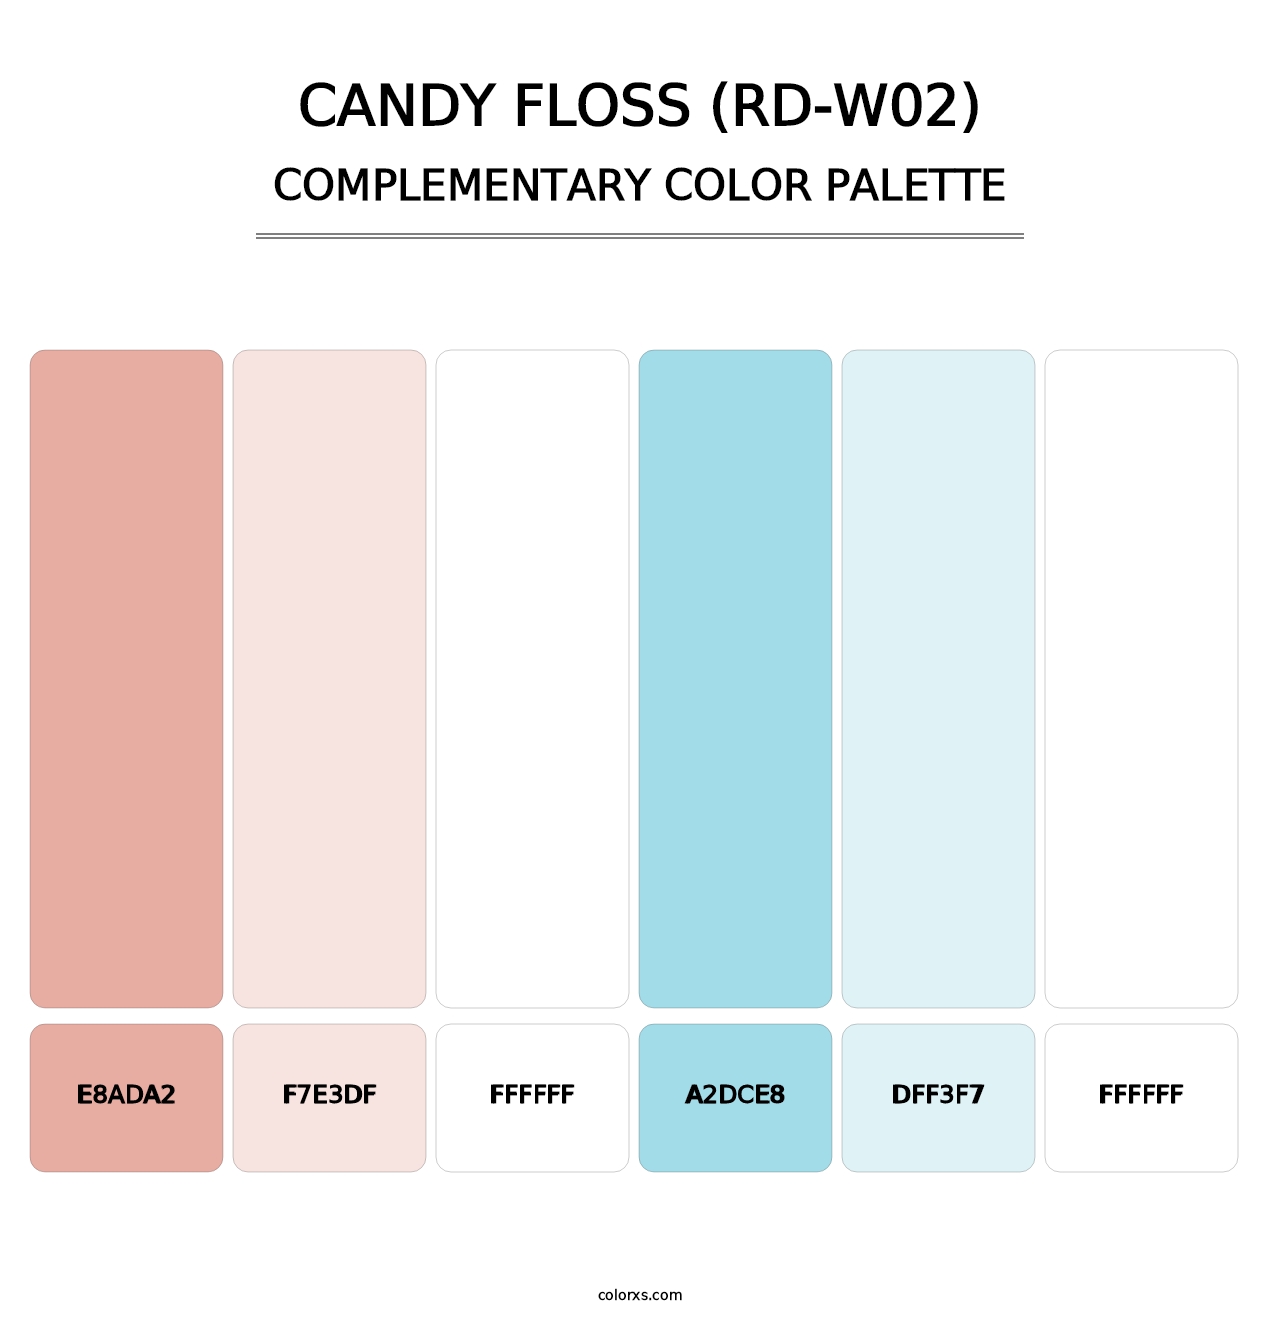 Candy Floss (RD-W02) - Complementary Color Palette